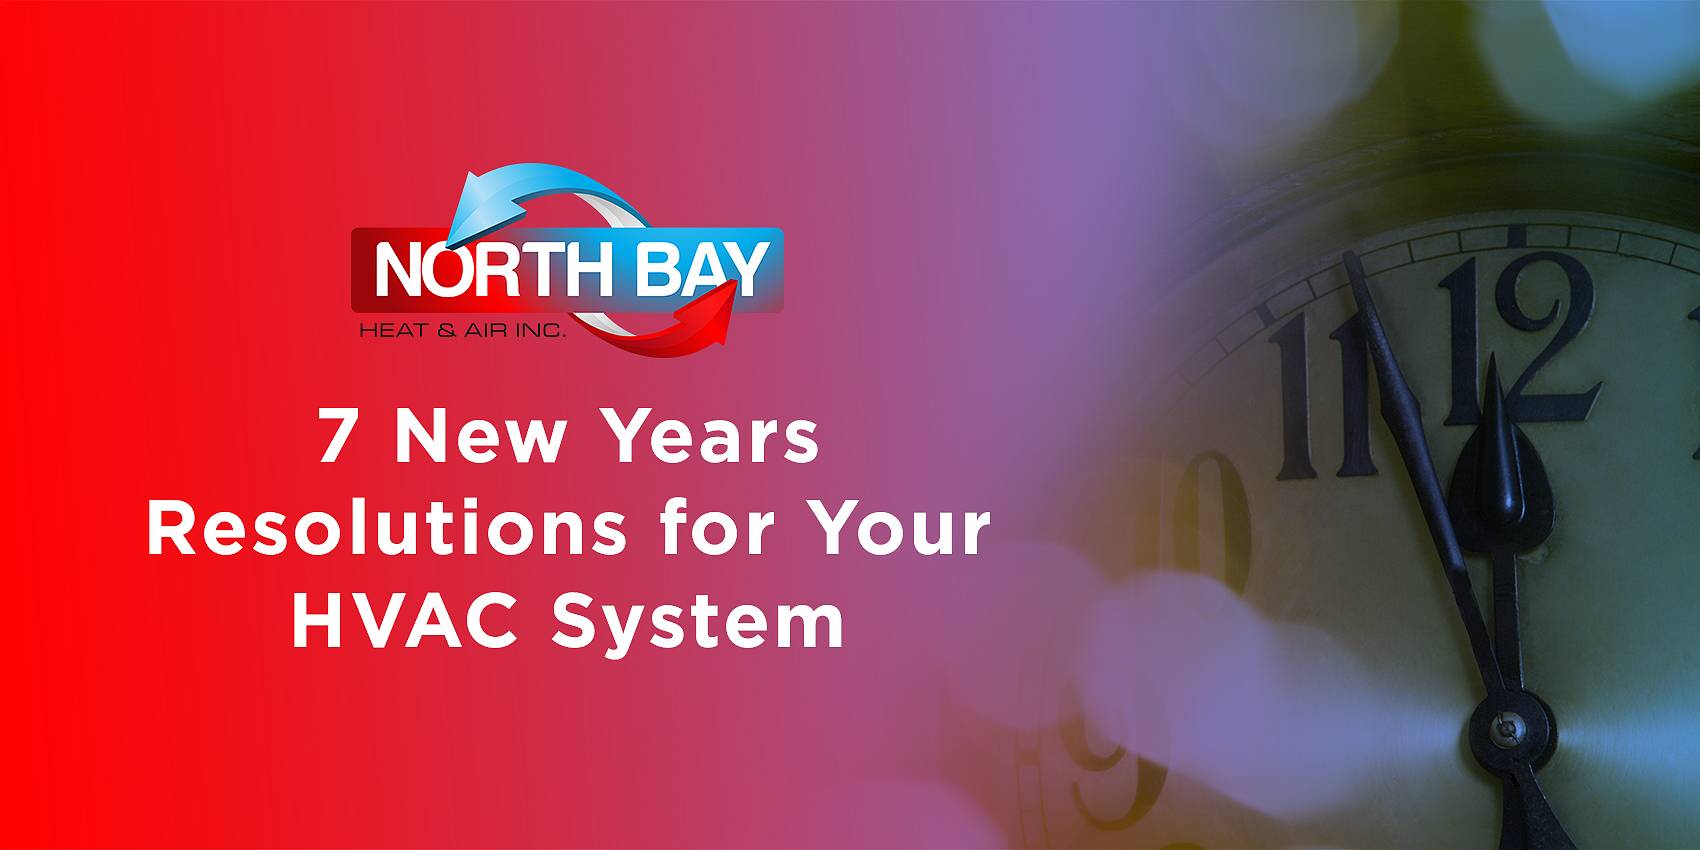 7 New Year's Resolutions for Your HVAC System